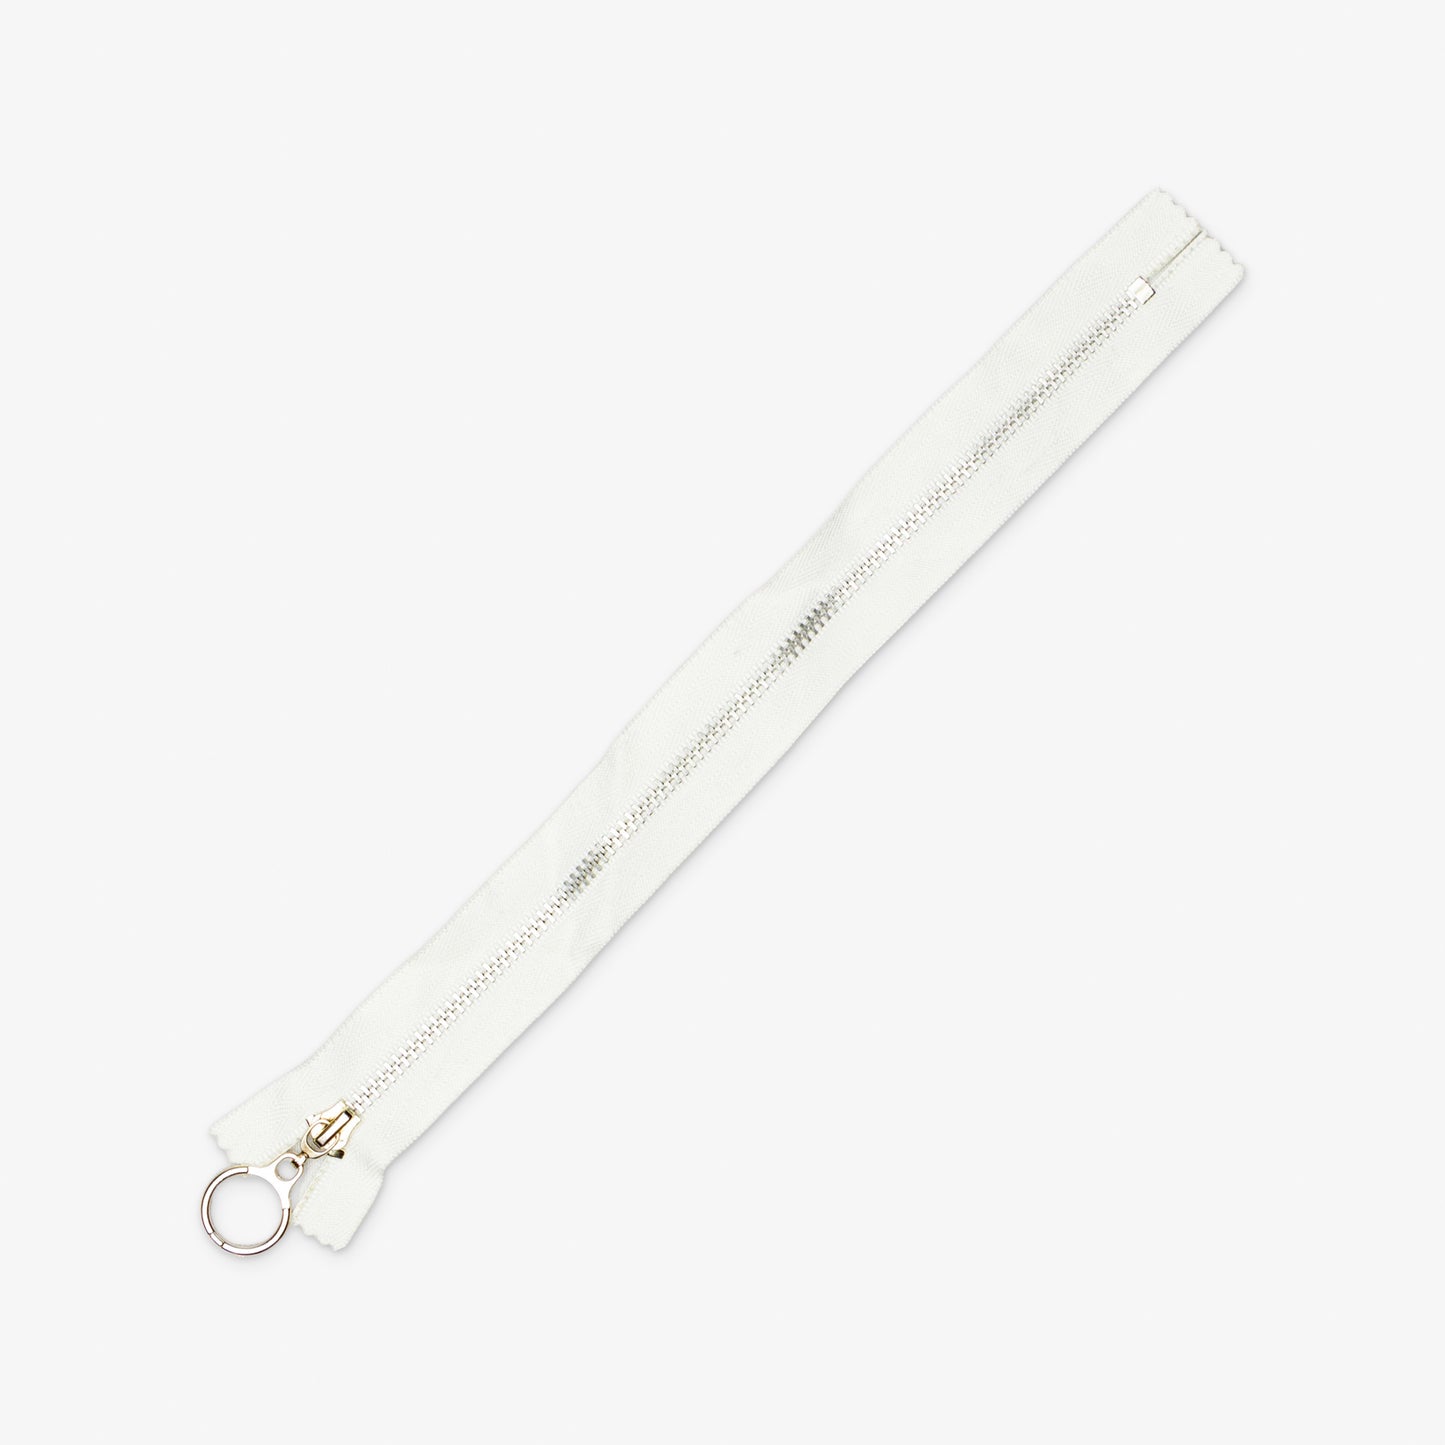 Metal Zips White Closed End (3 Sizes)